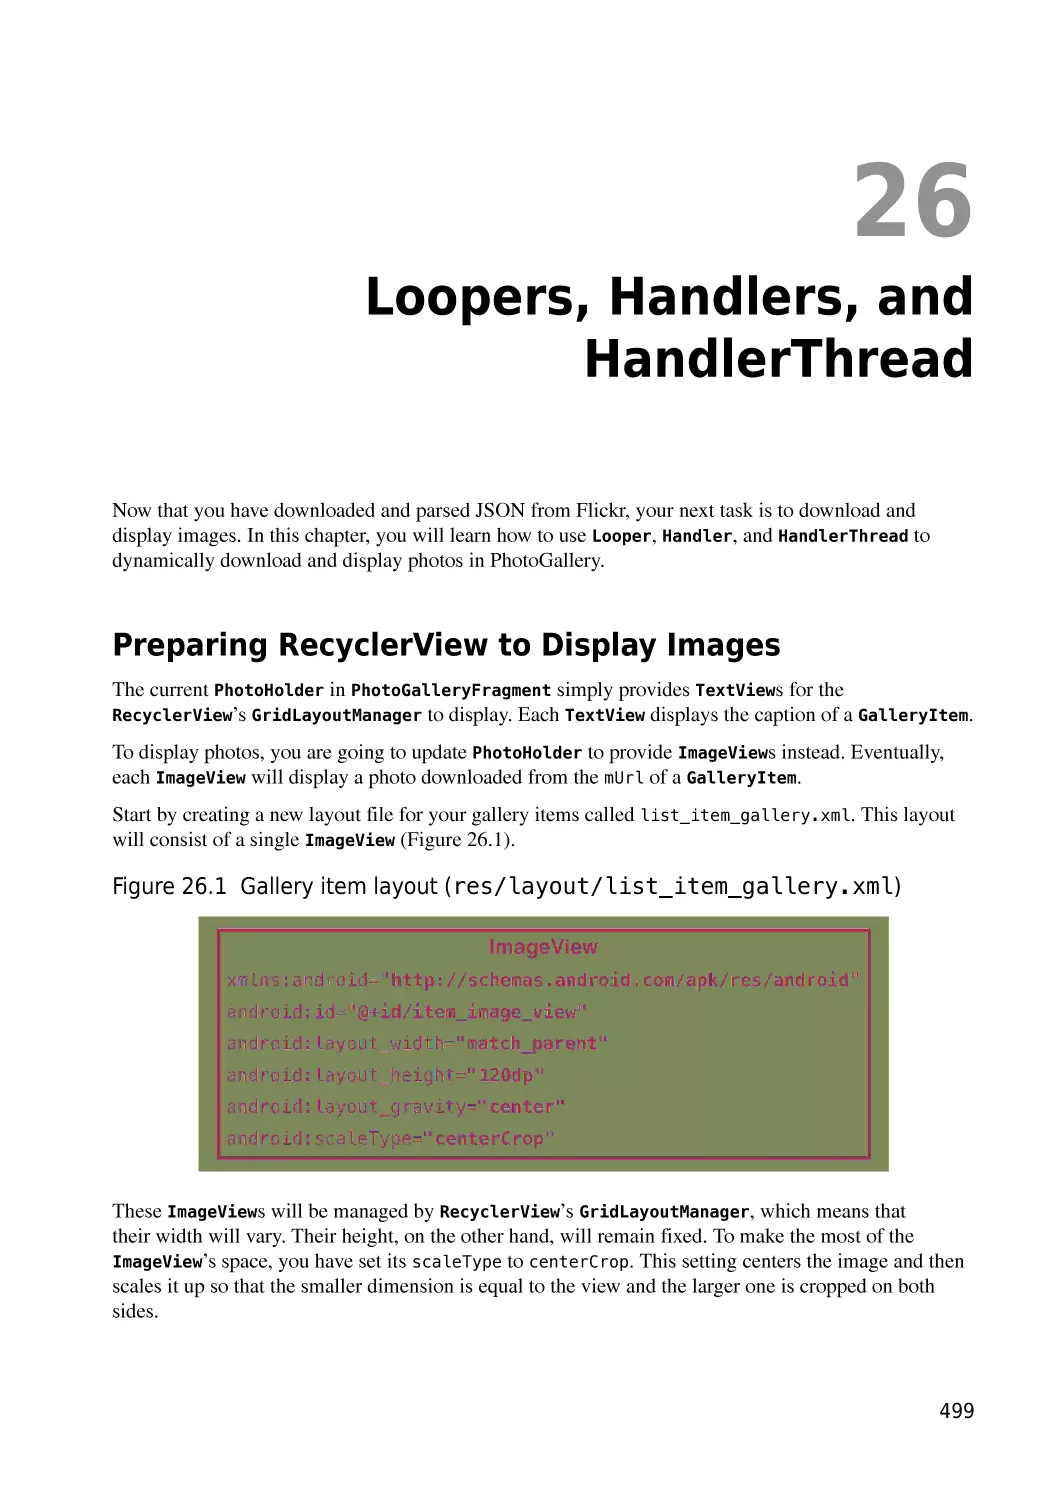 Chapter 26  Loopers, Handlers, and HandlerThread
Preparing RecyclerView to Display Images